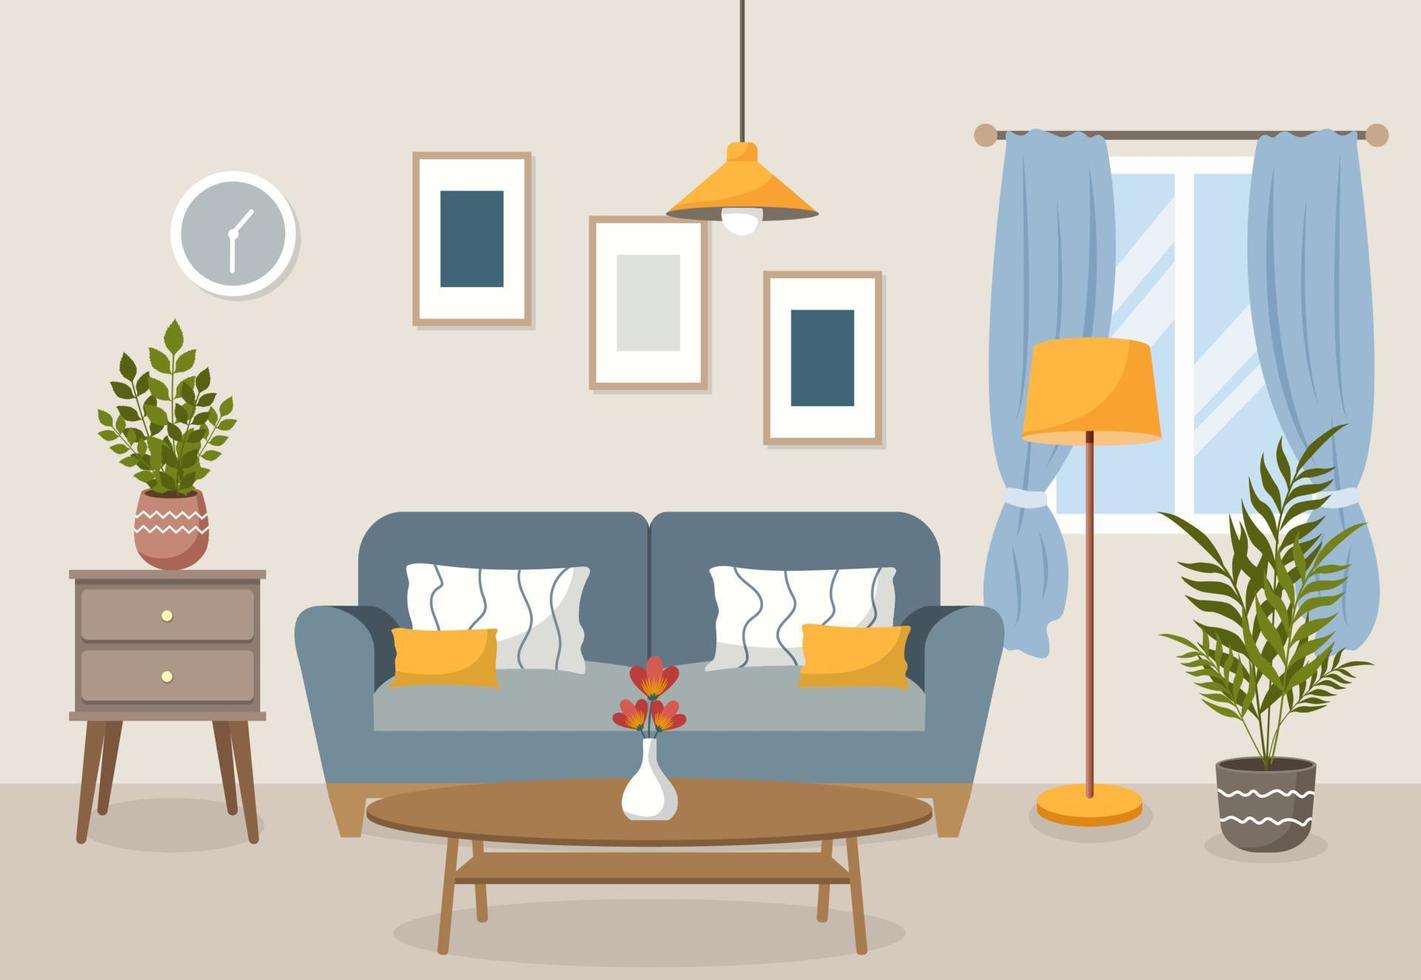 Living room interior. Vector flat illustration. Comfortable sofa with cushions, lantern, window, armchair and indoor plants, bedside table with flower.